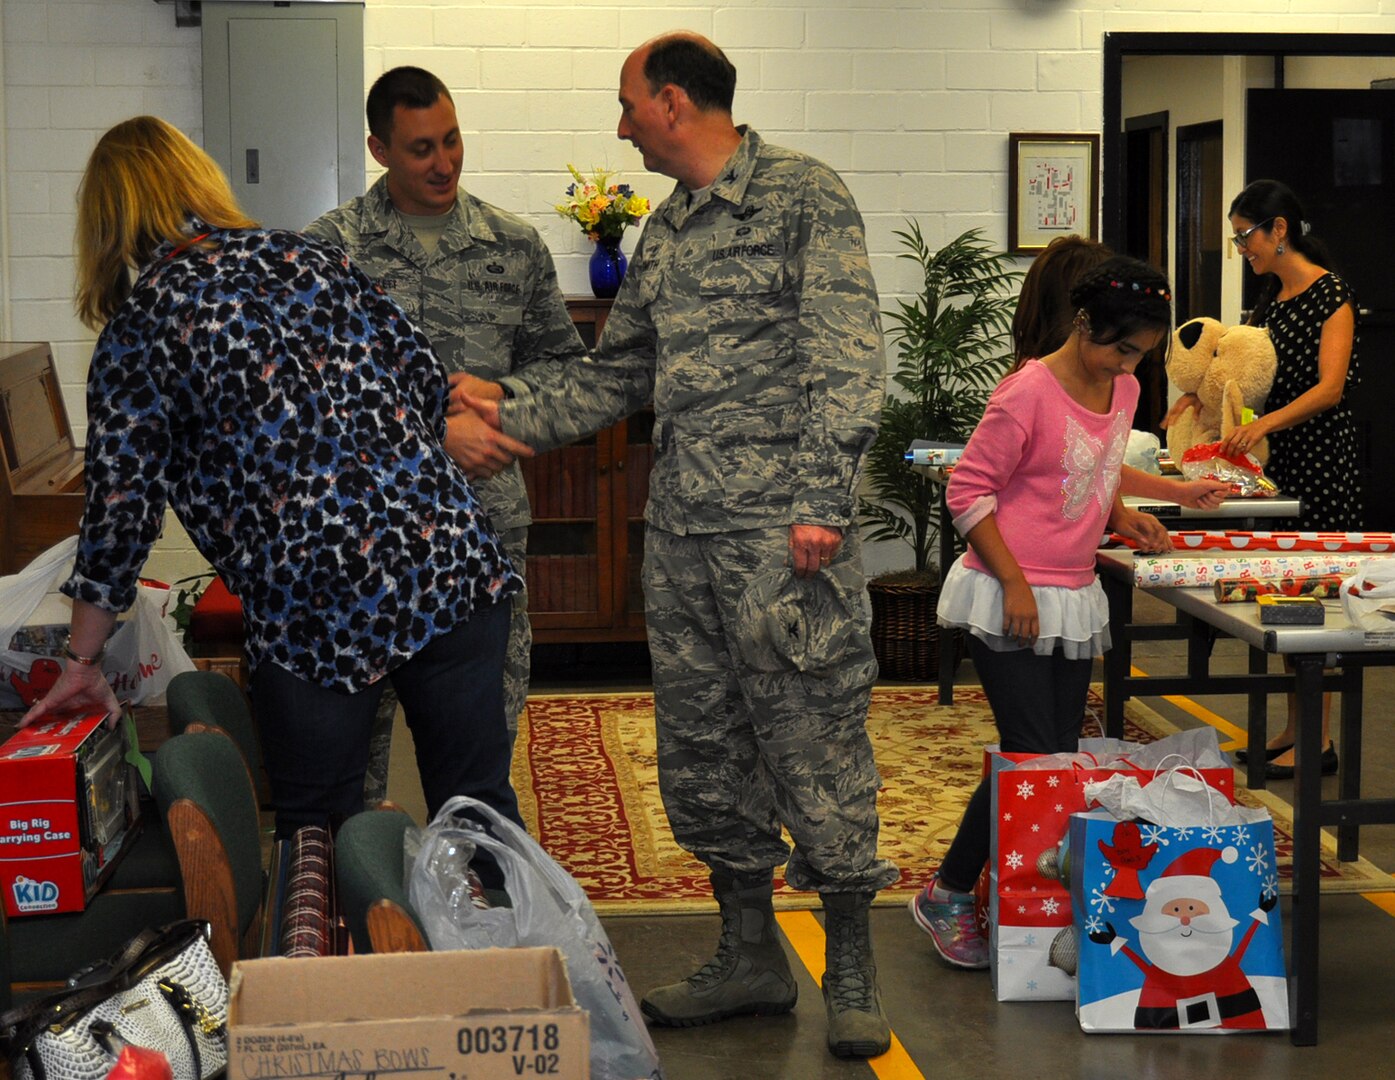 Over 100 presents were given for the sponsored families by 433rd AW Citizen Airmen and donations valued at more than $2,000.